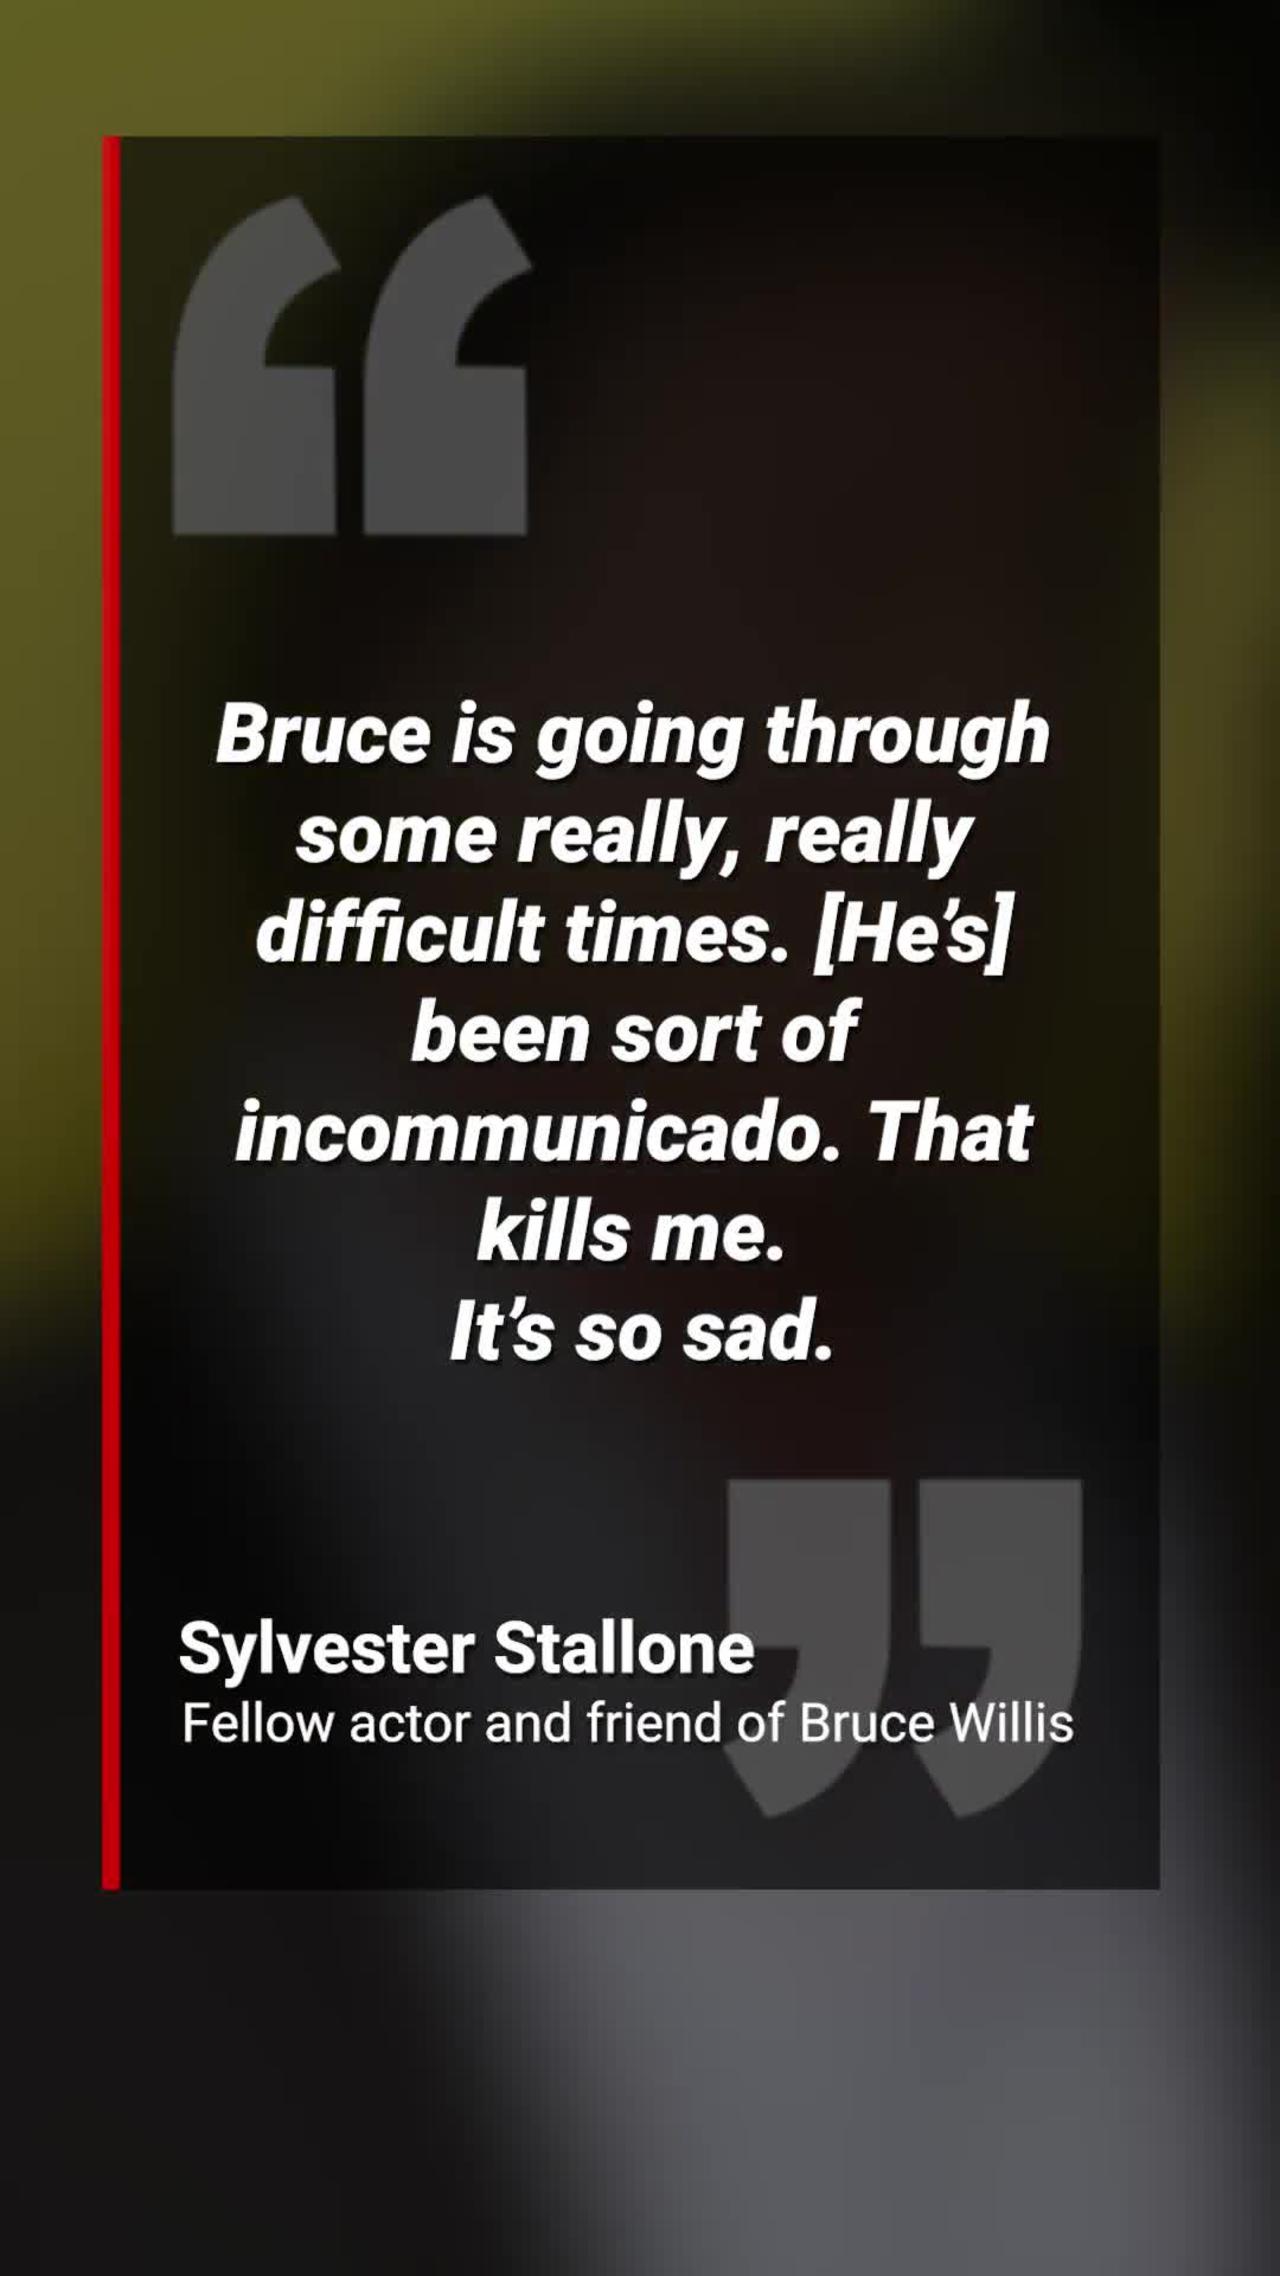 Sly Stallone gives sad update on Bruce Willis’ condition